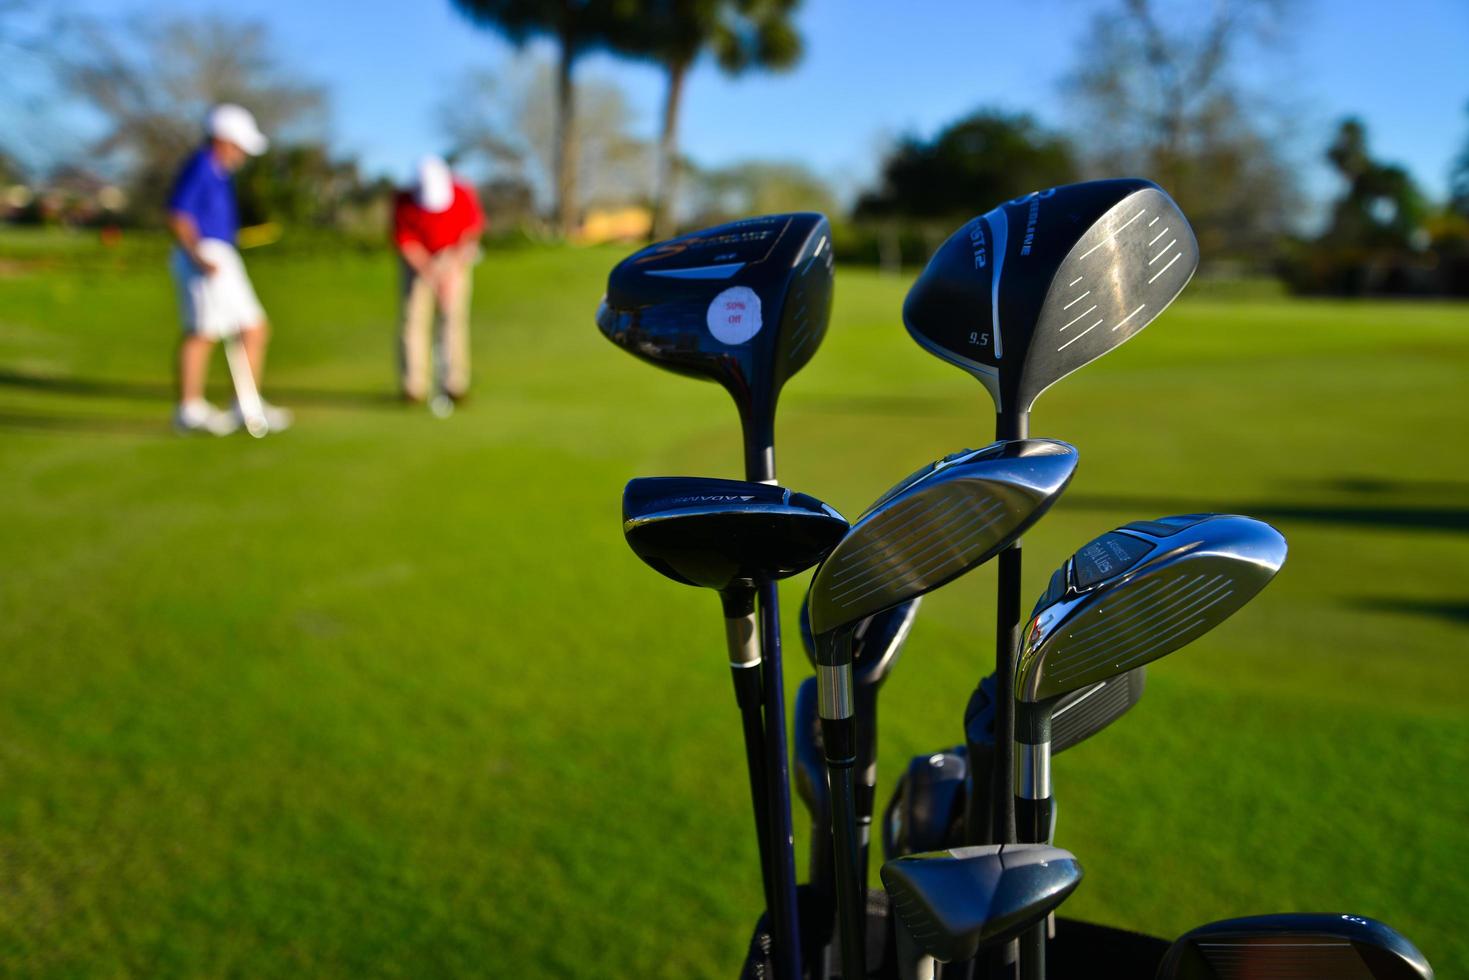 Golf Clubs and Golfers, photo